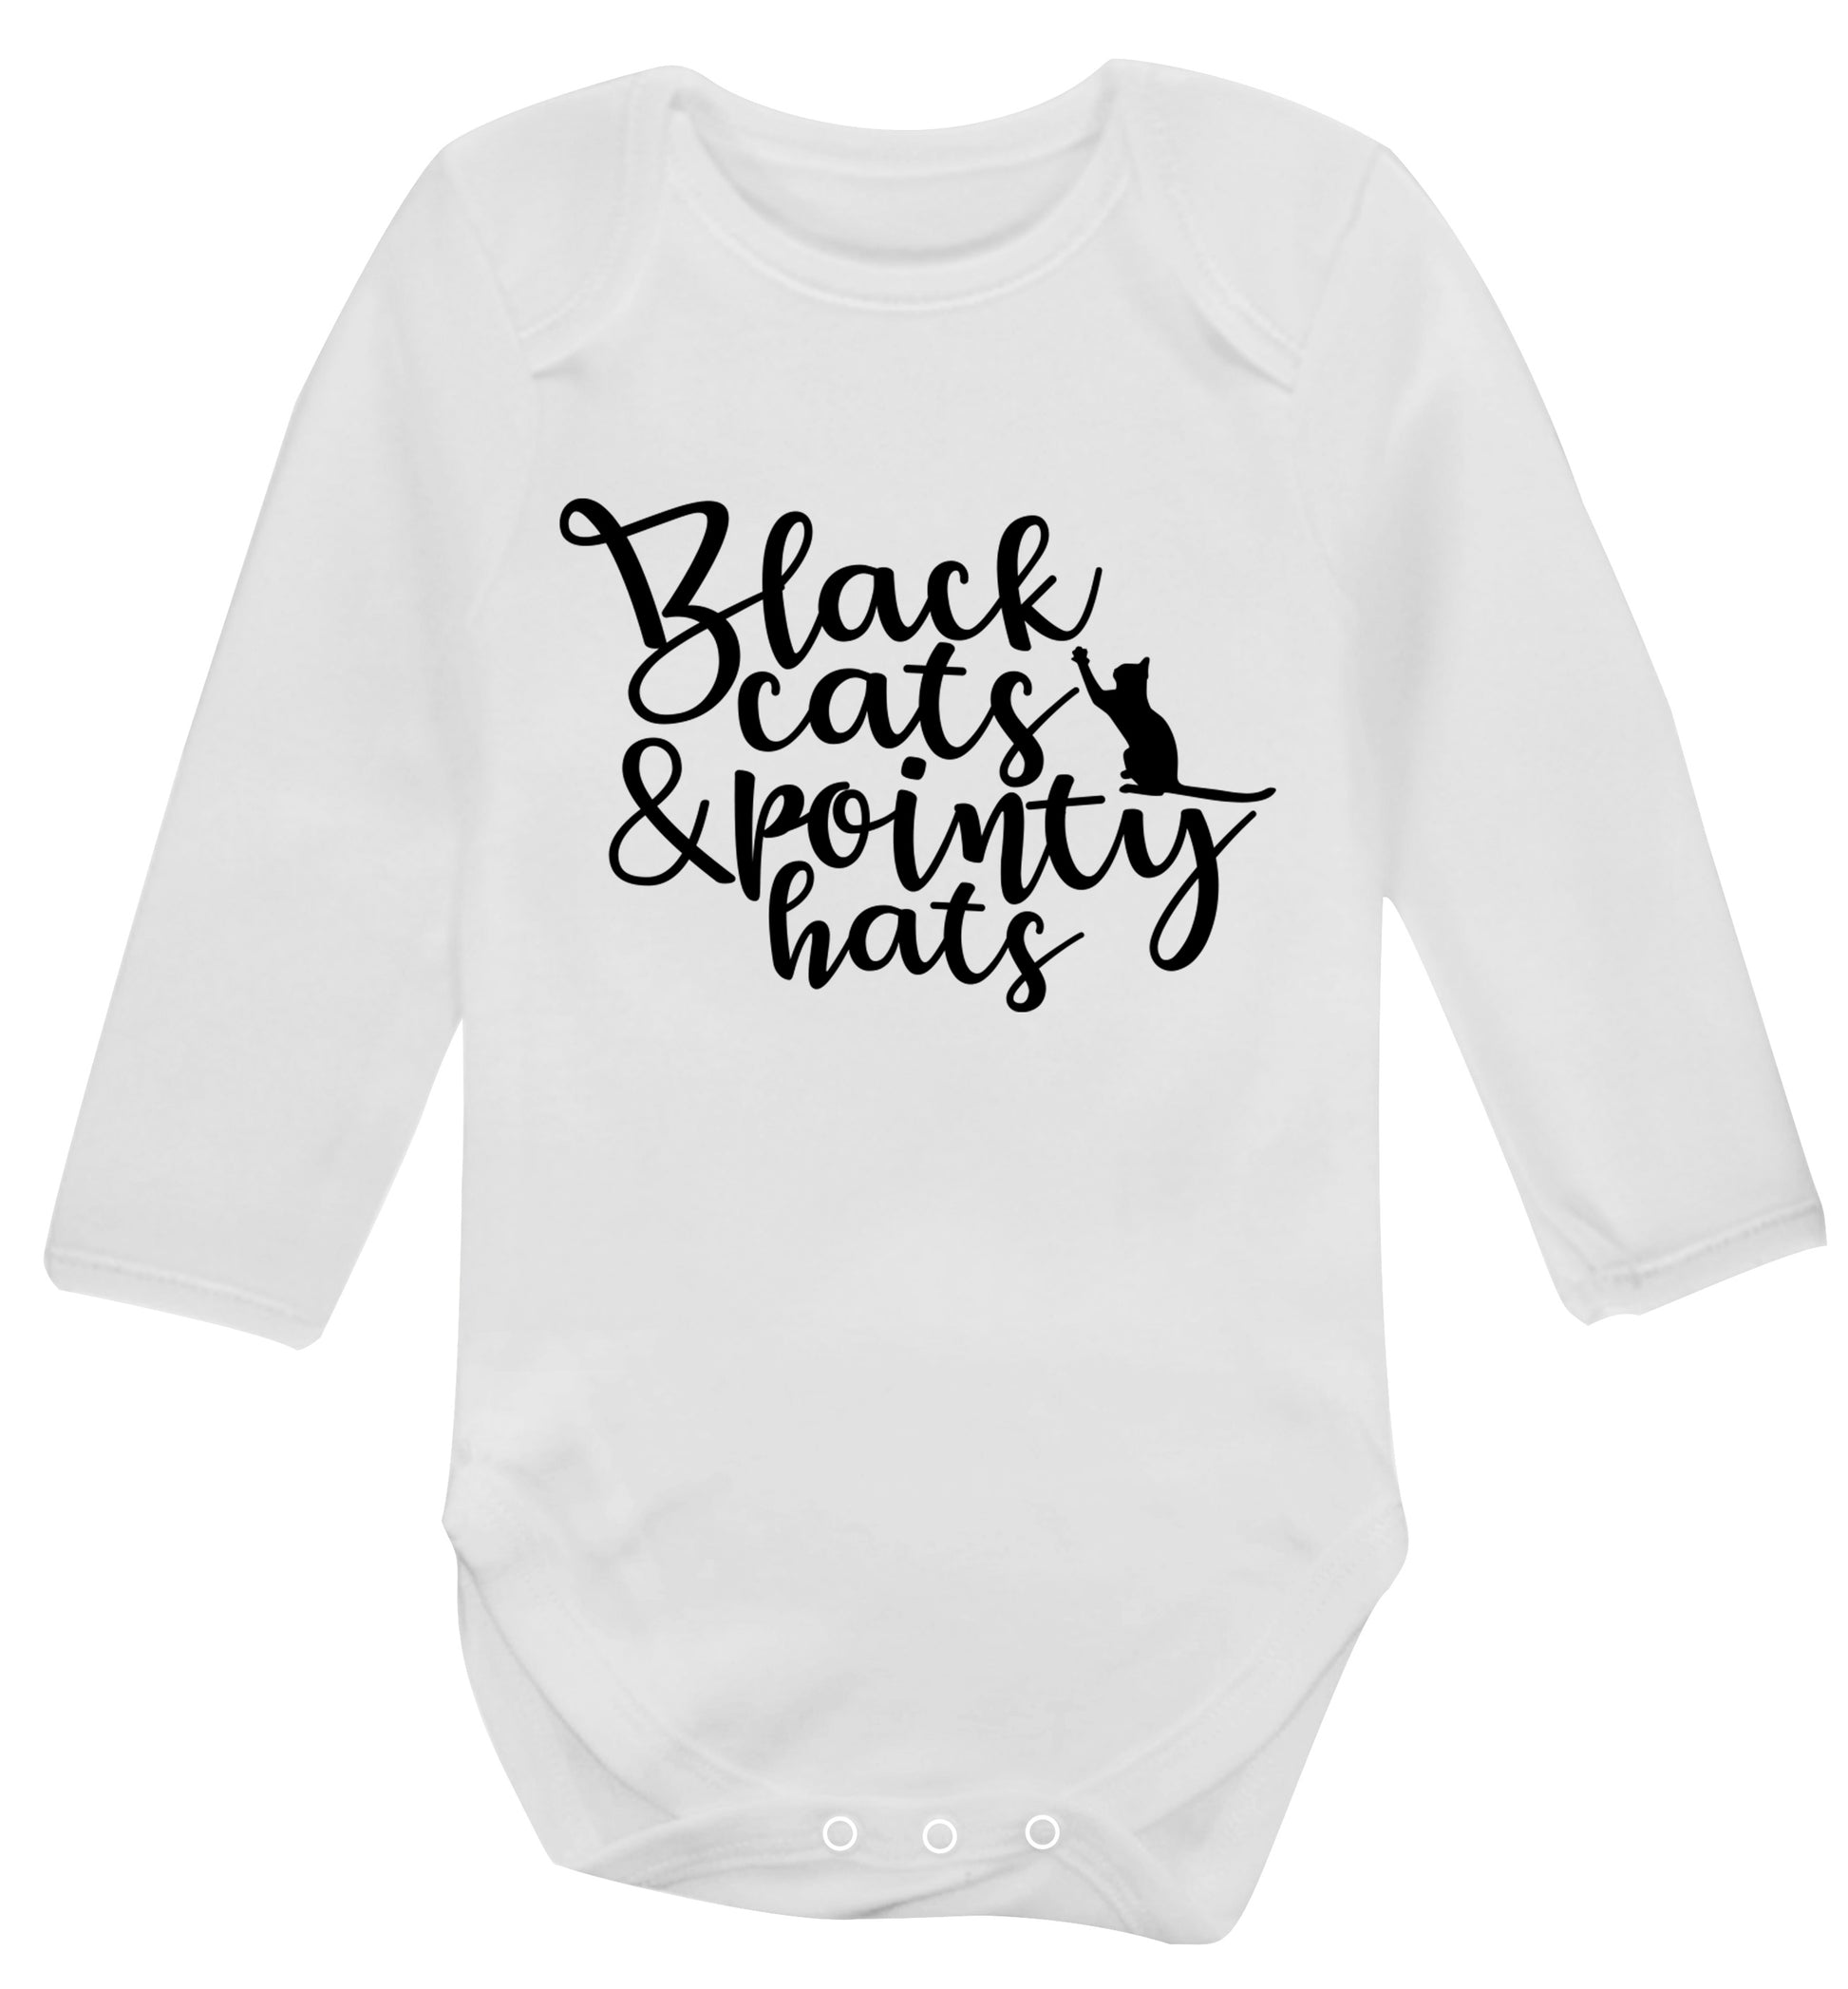 Black cats and pointy hats Baby Vest long sleeved white 6-12 months